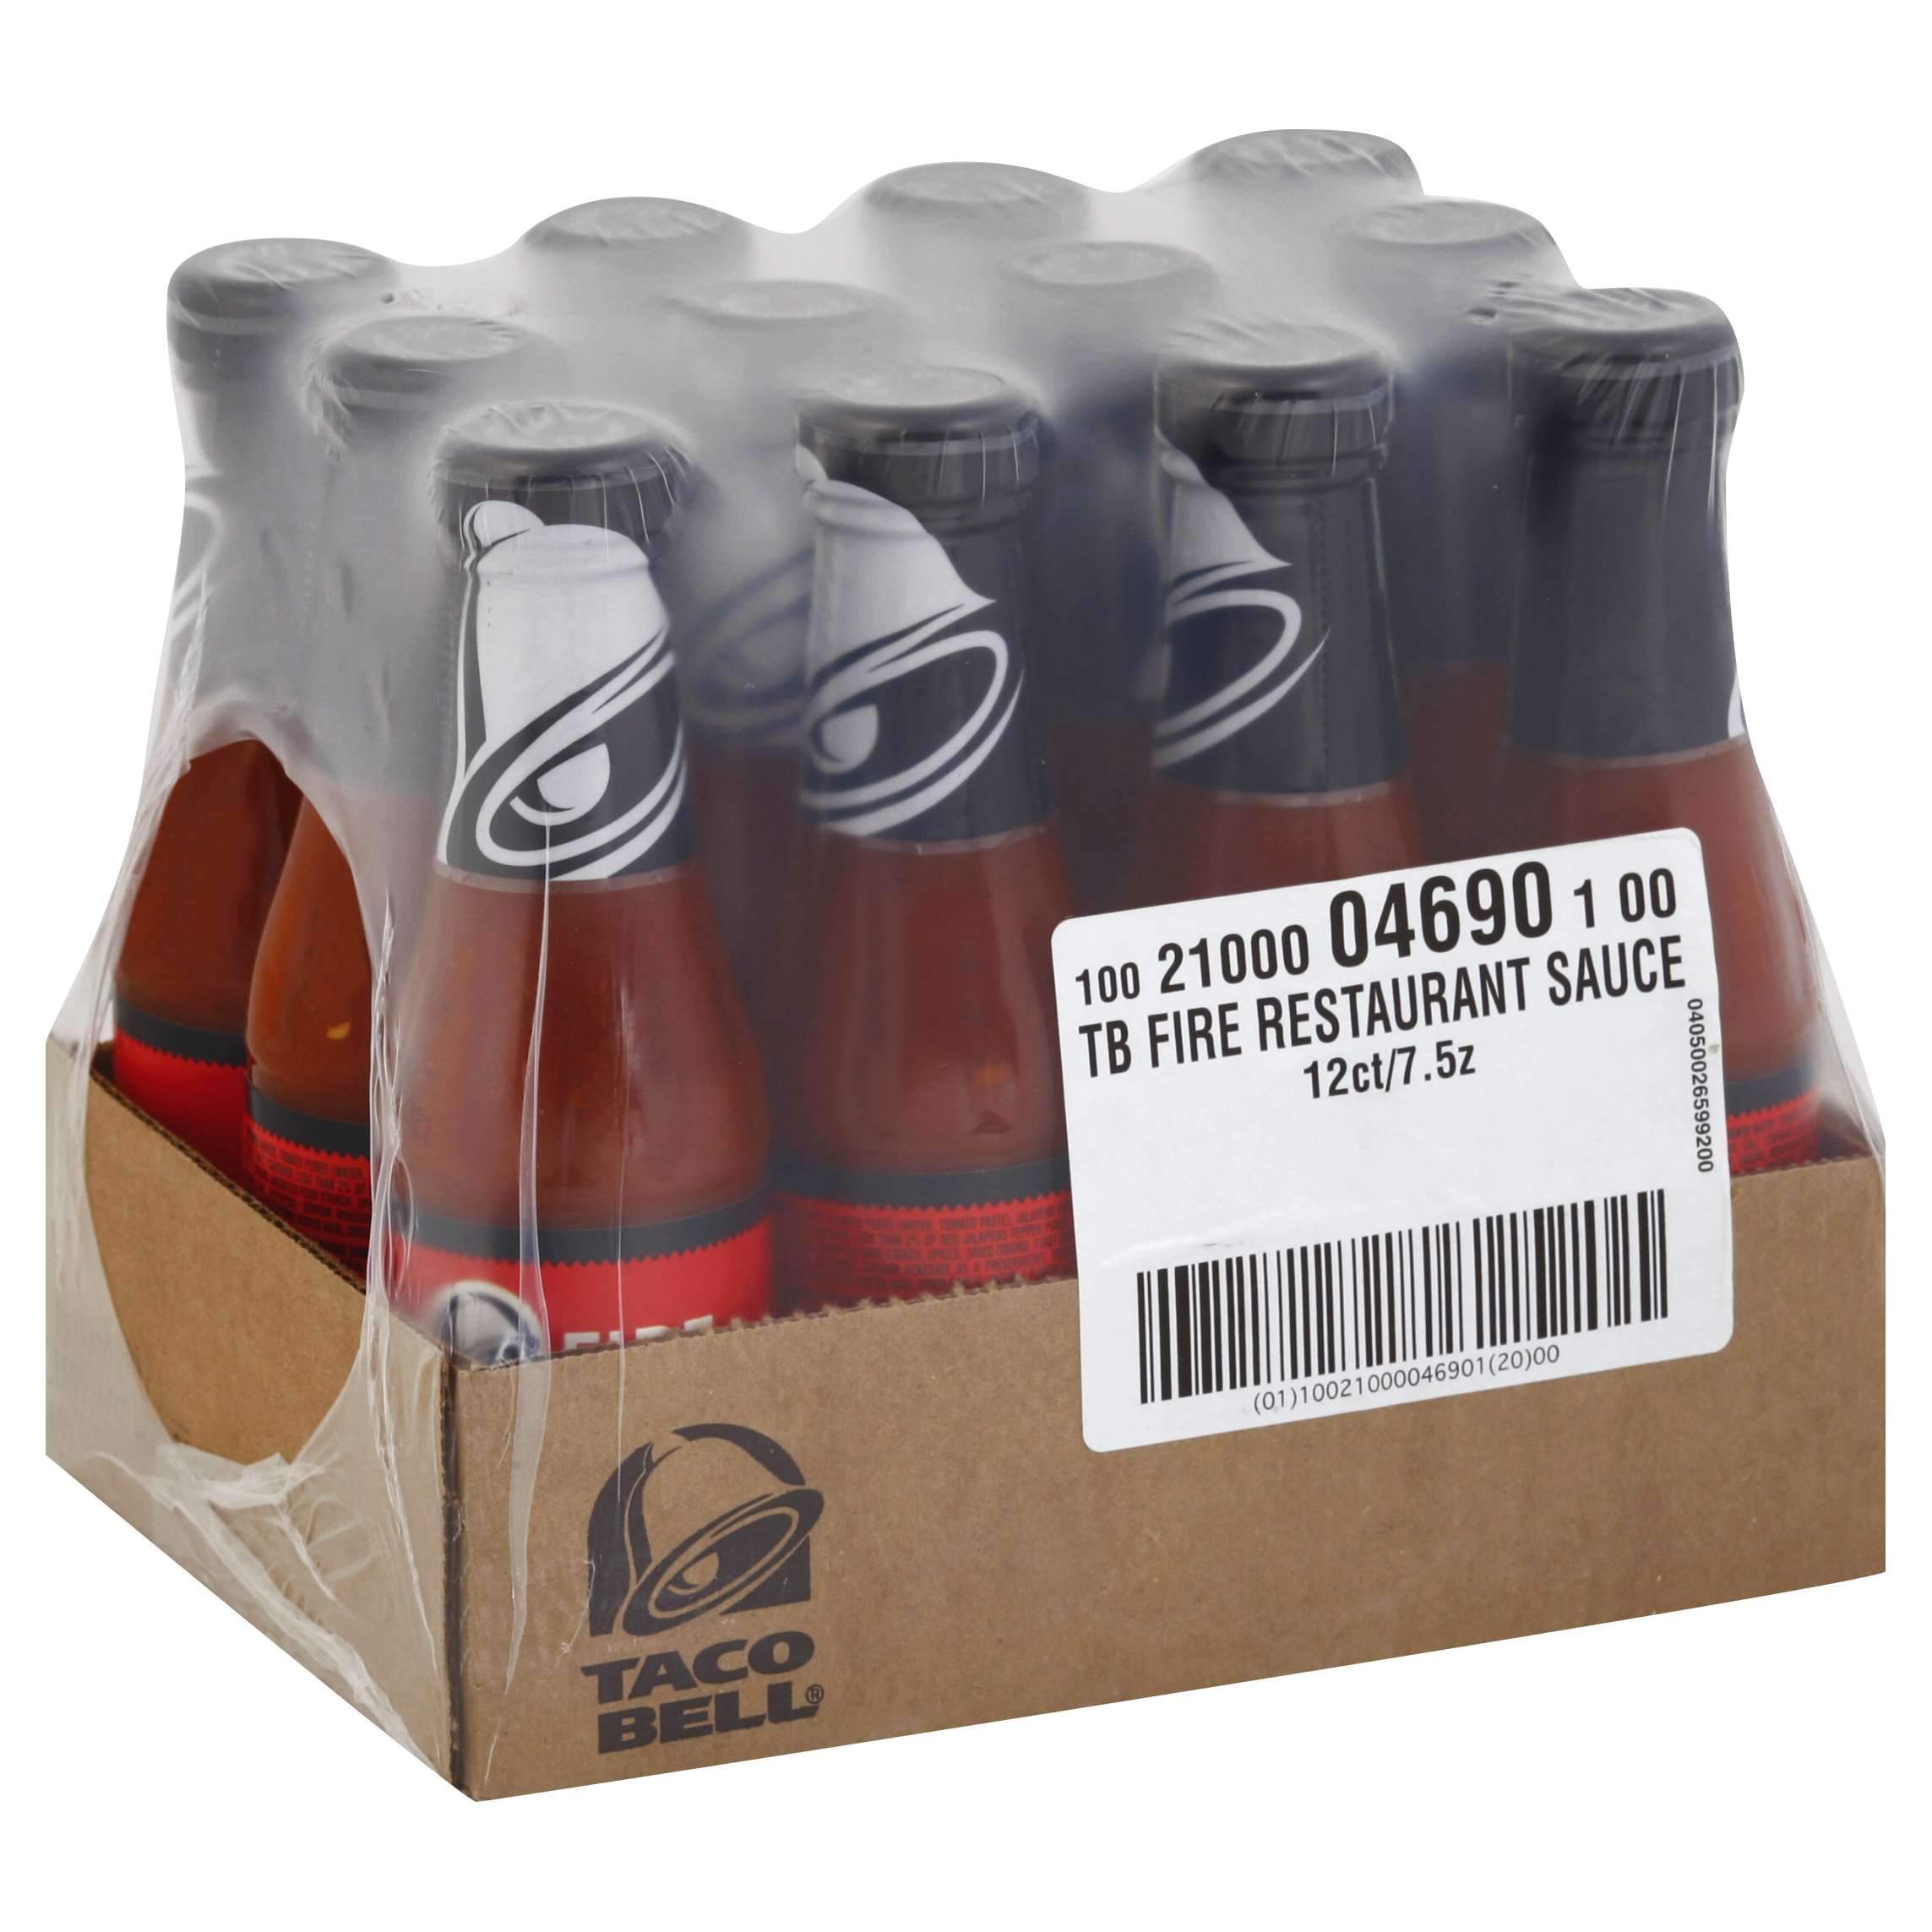 Taco Bell Sauce Taco Bell Fire Sauce 7.5 Oz-12 Count 